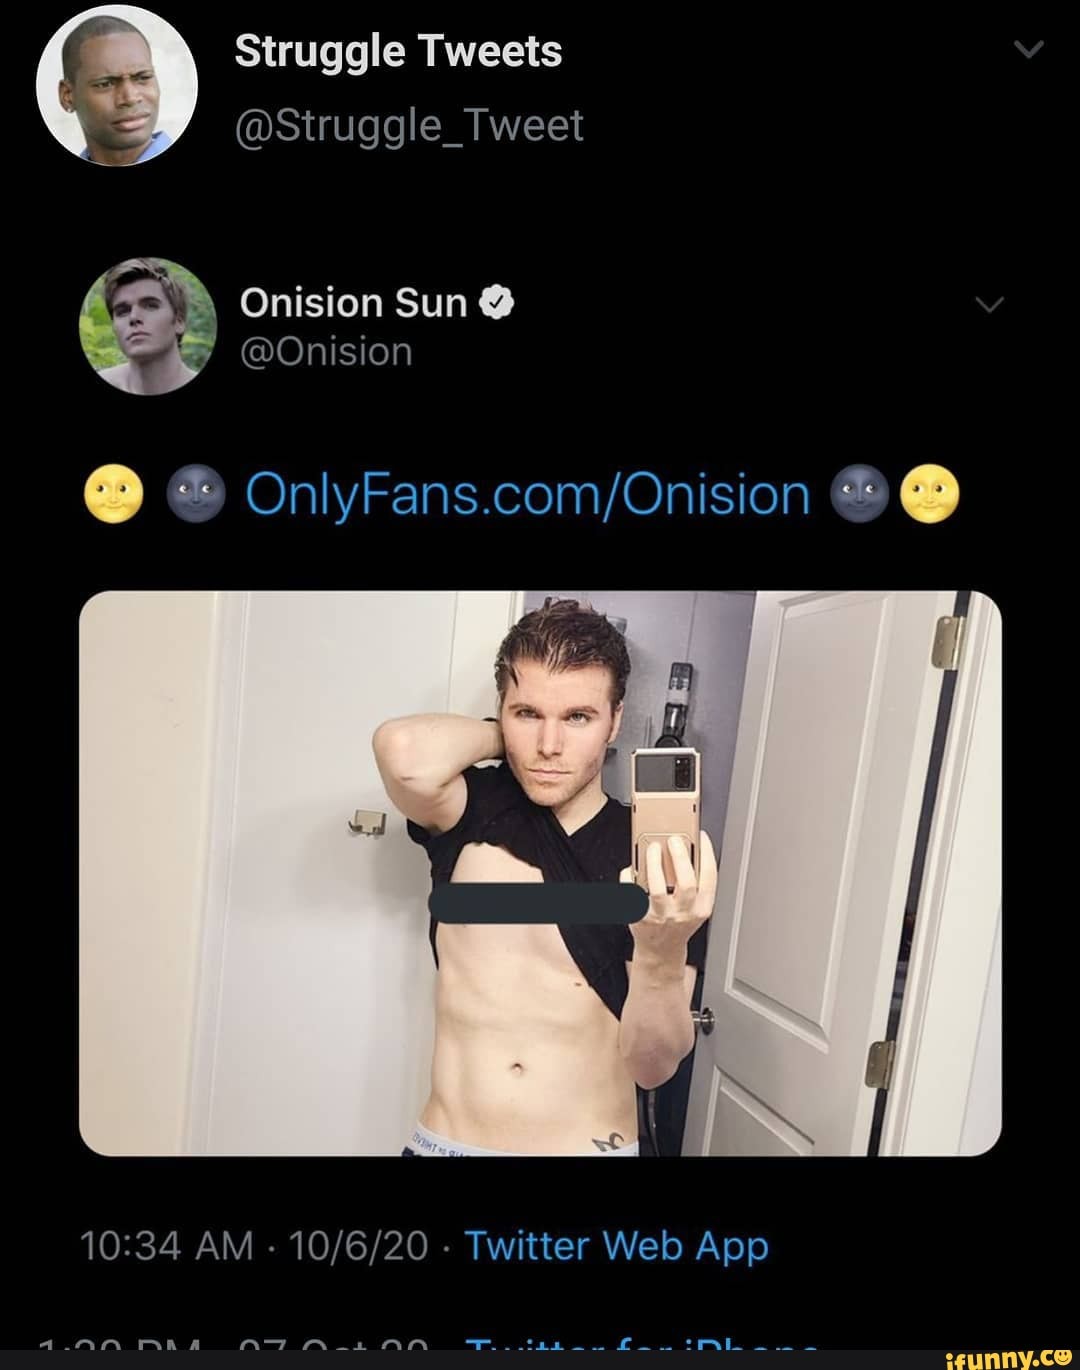 Onision twitter